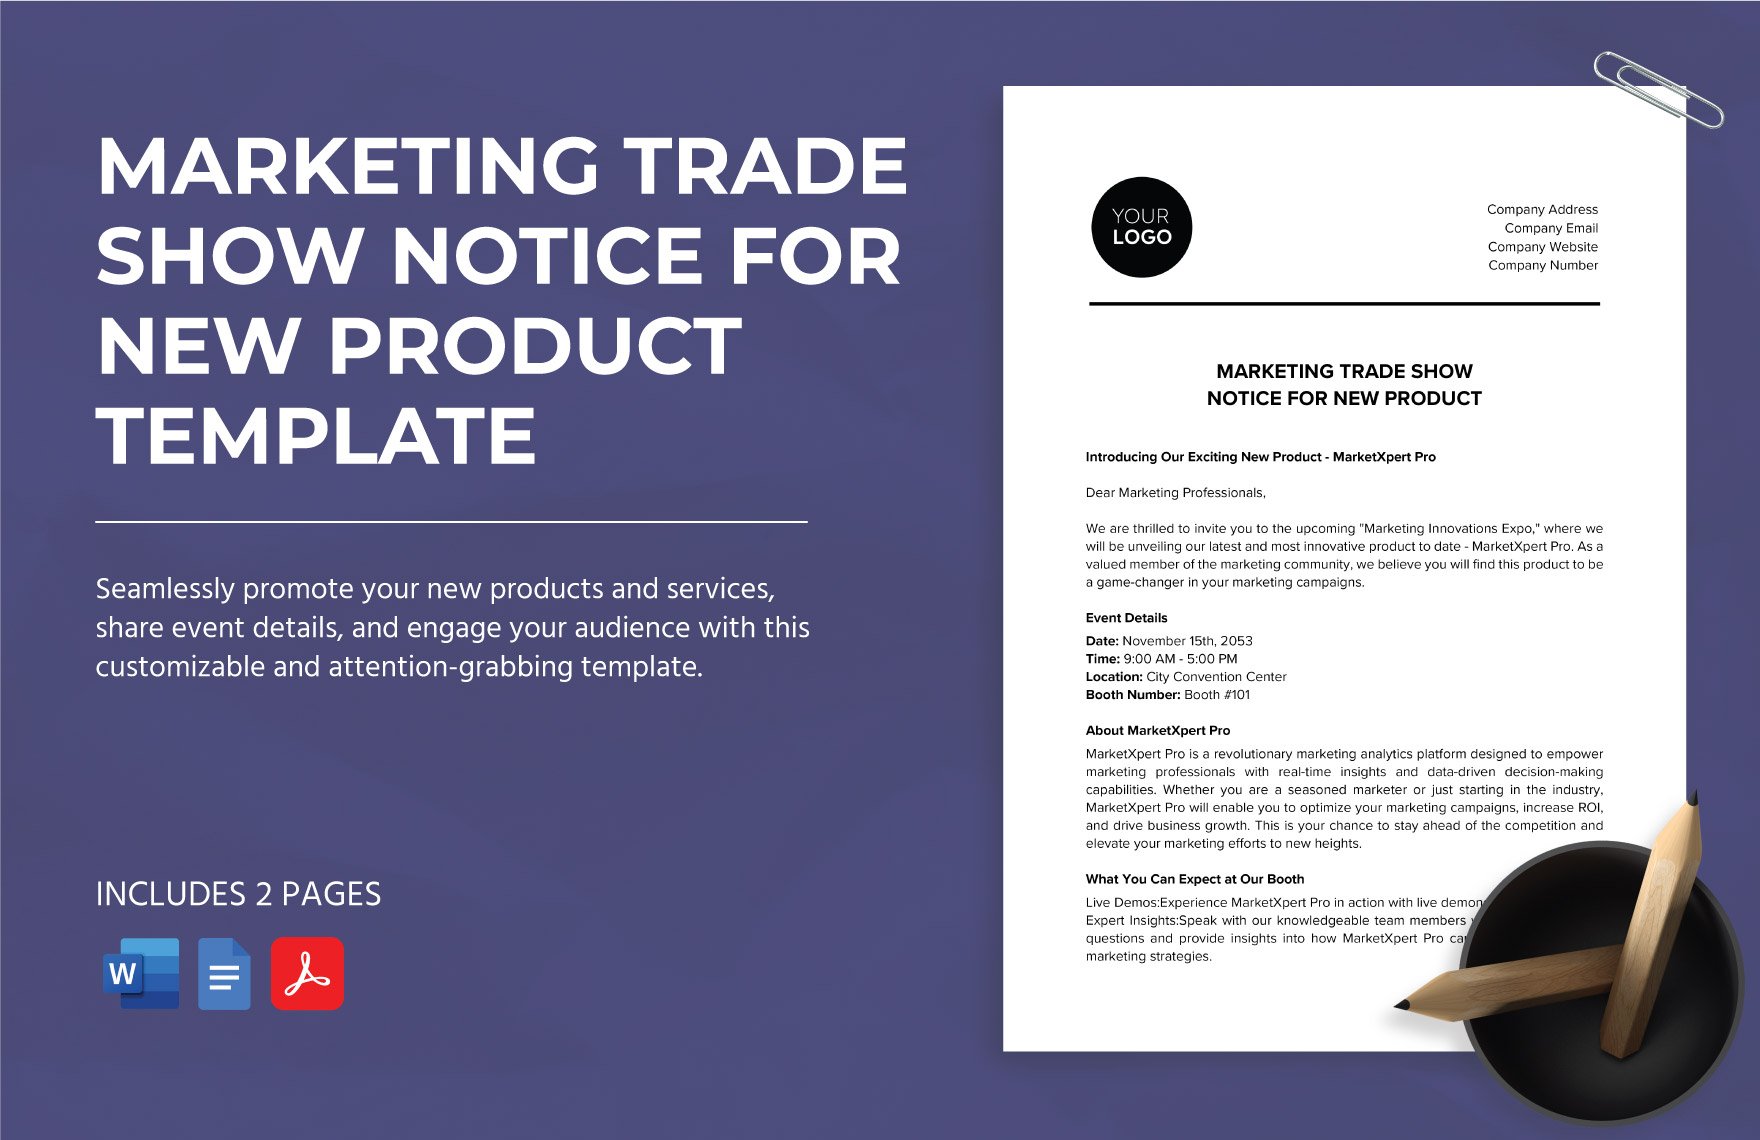 Marketing Trade Show Notice for New Product Template in Word, Google Docs, PDF